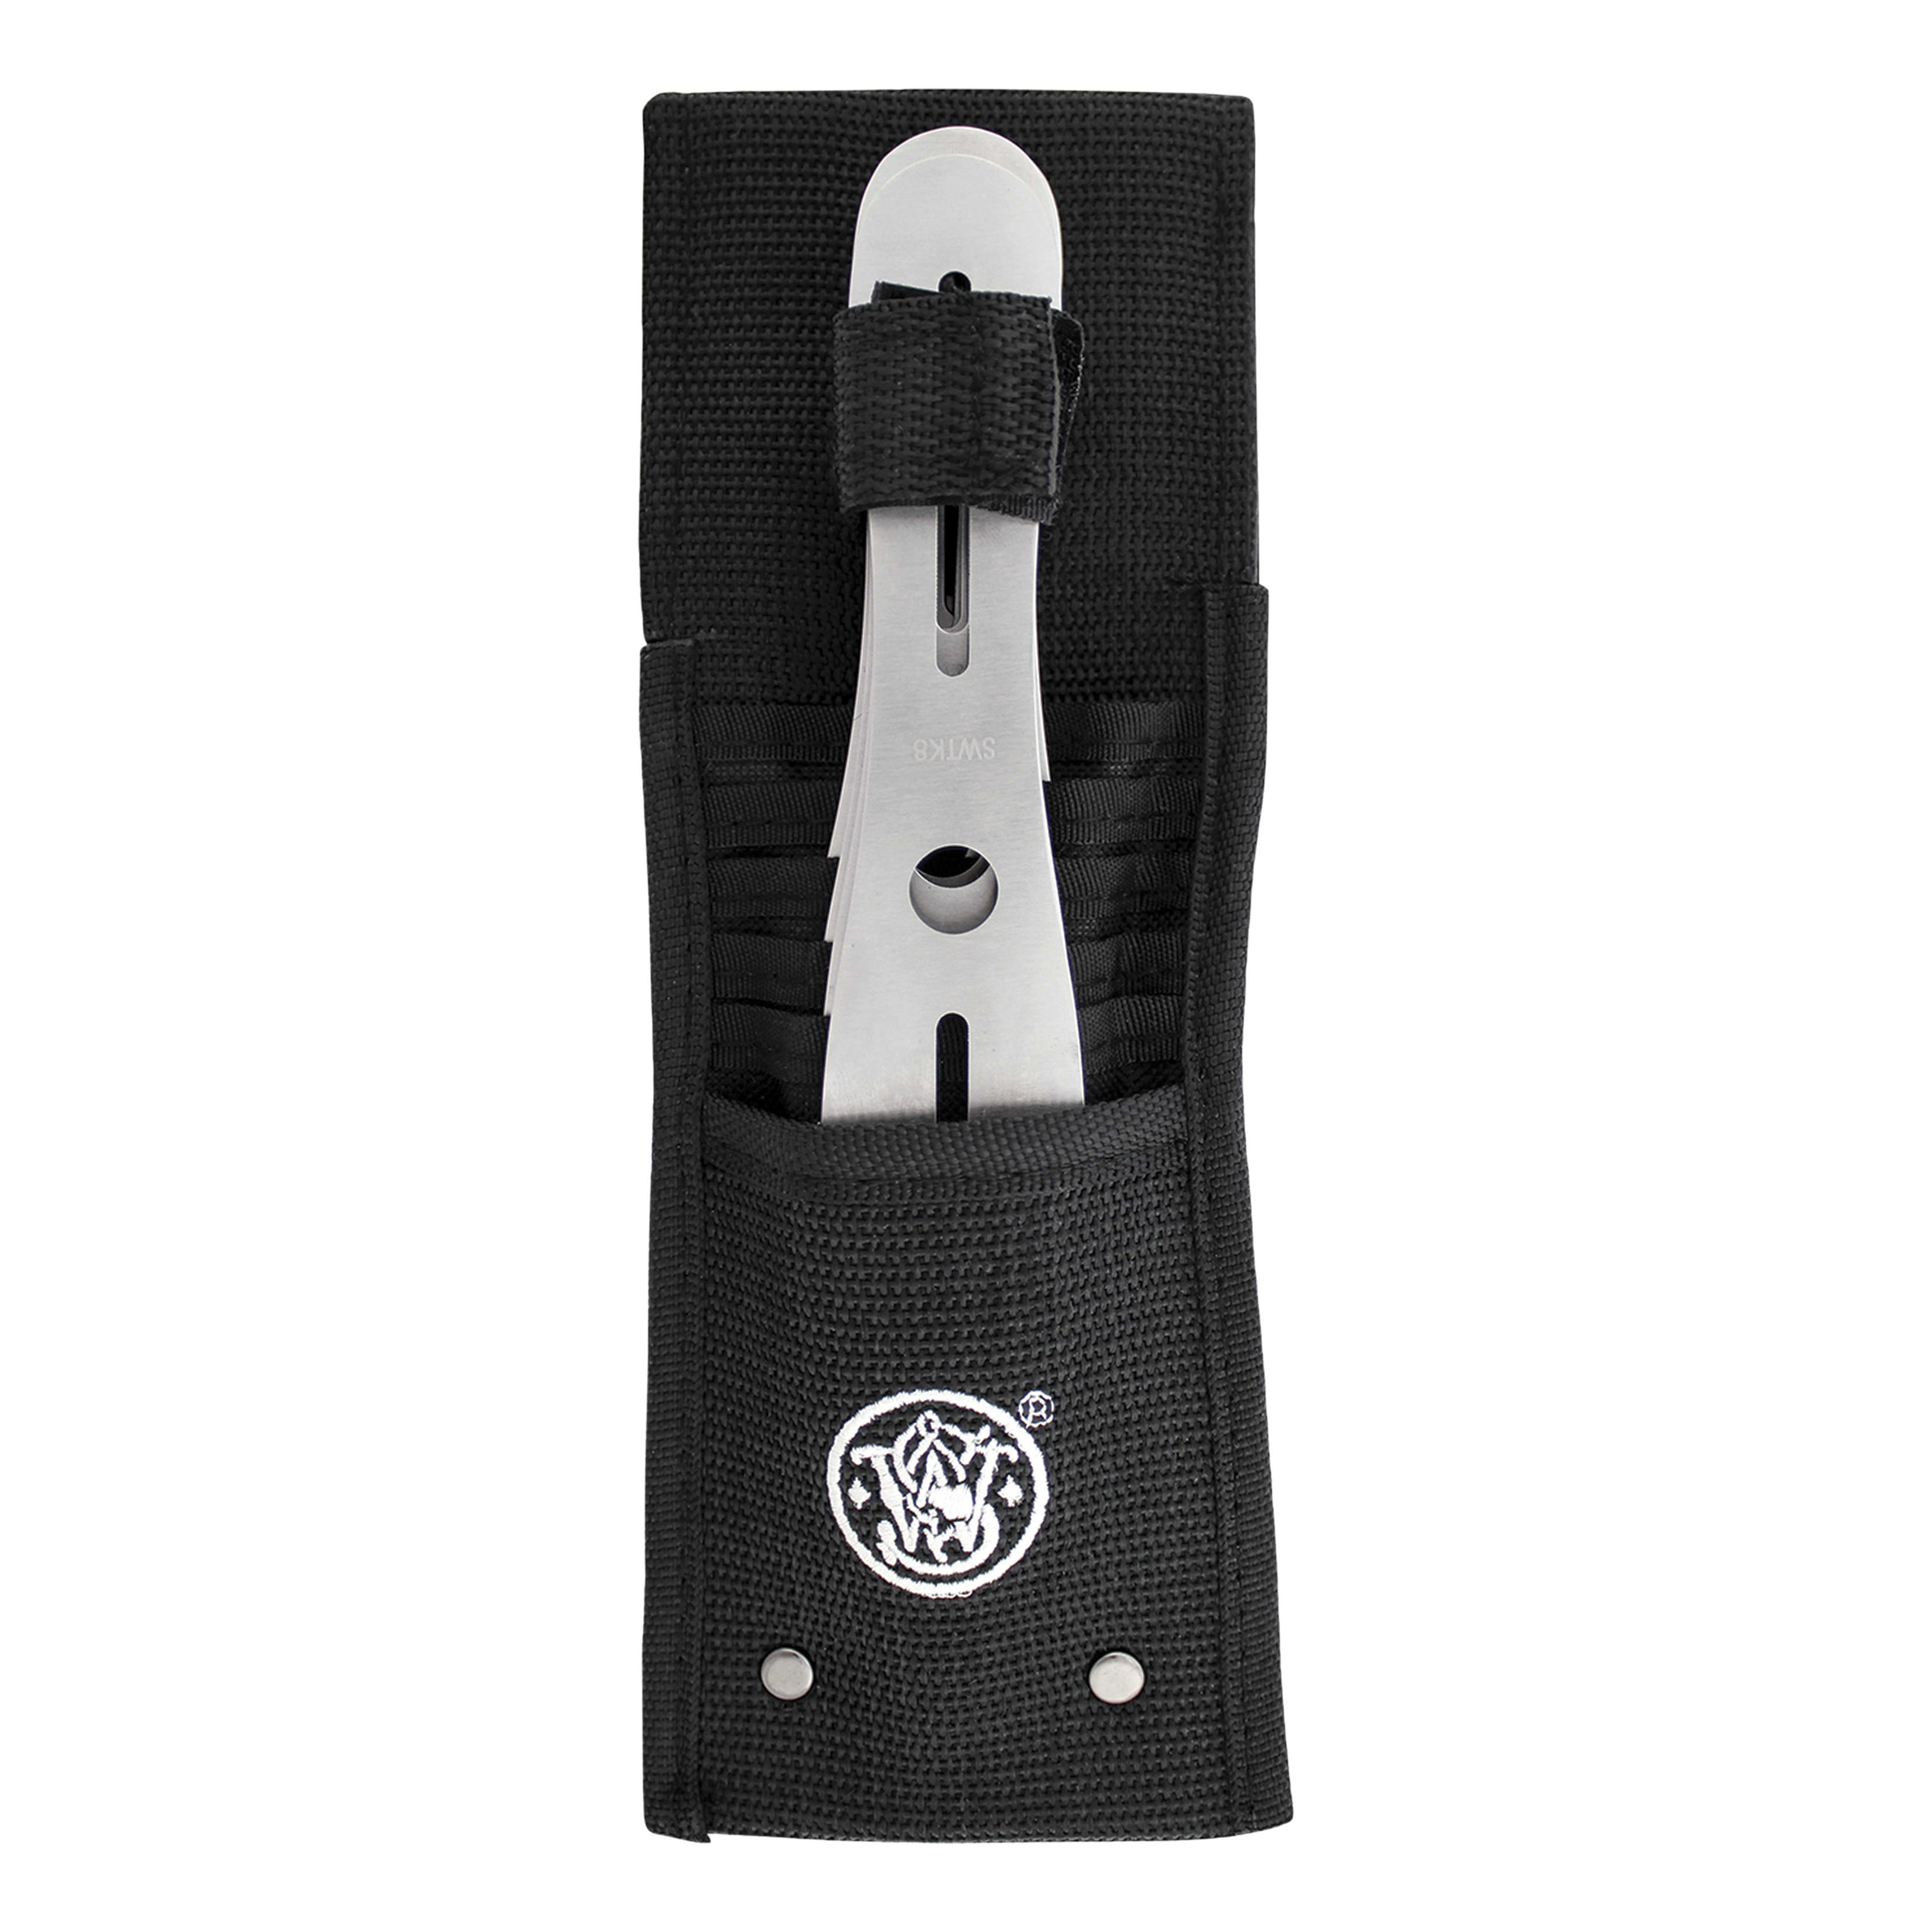 Smith & Wesson® Axe and Knife Throwing Combo Set - Knives in Sheath View